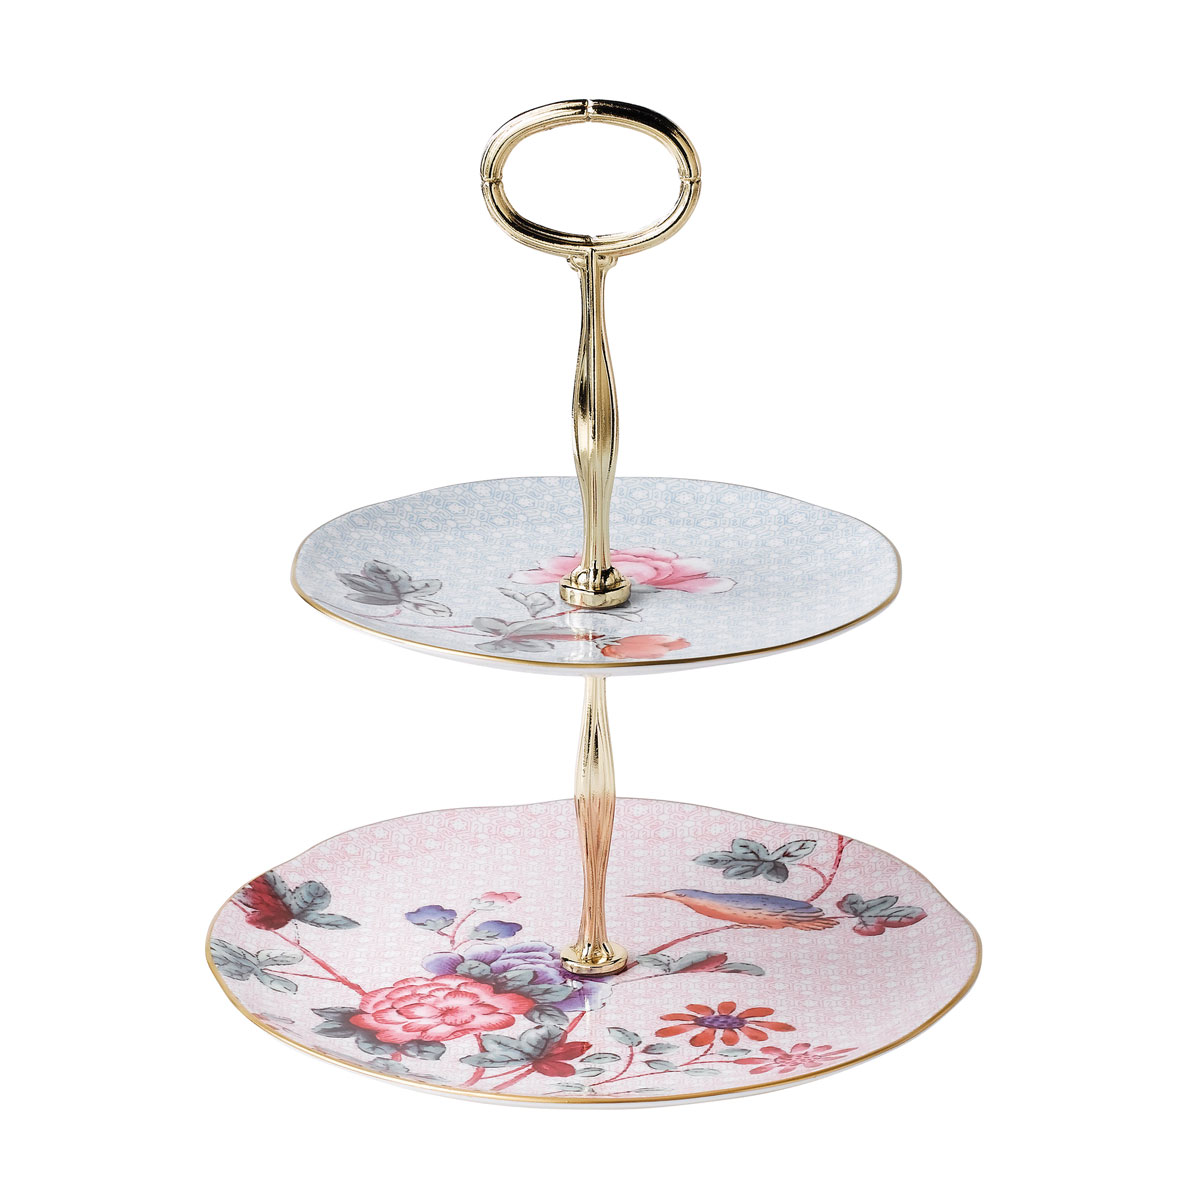 Wedgwood China Cuckoo Cake Stand Two-Tier